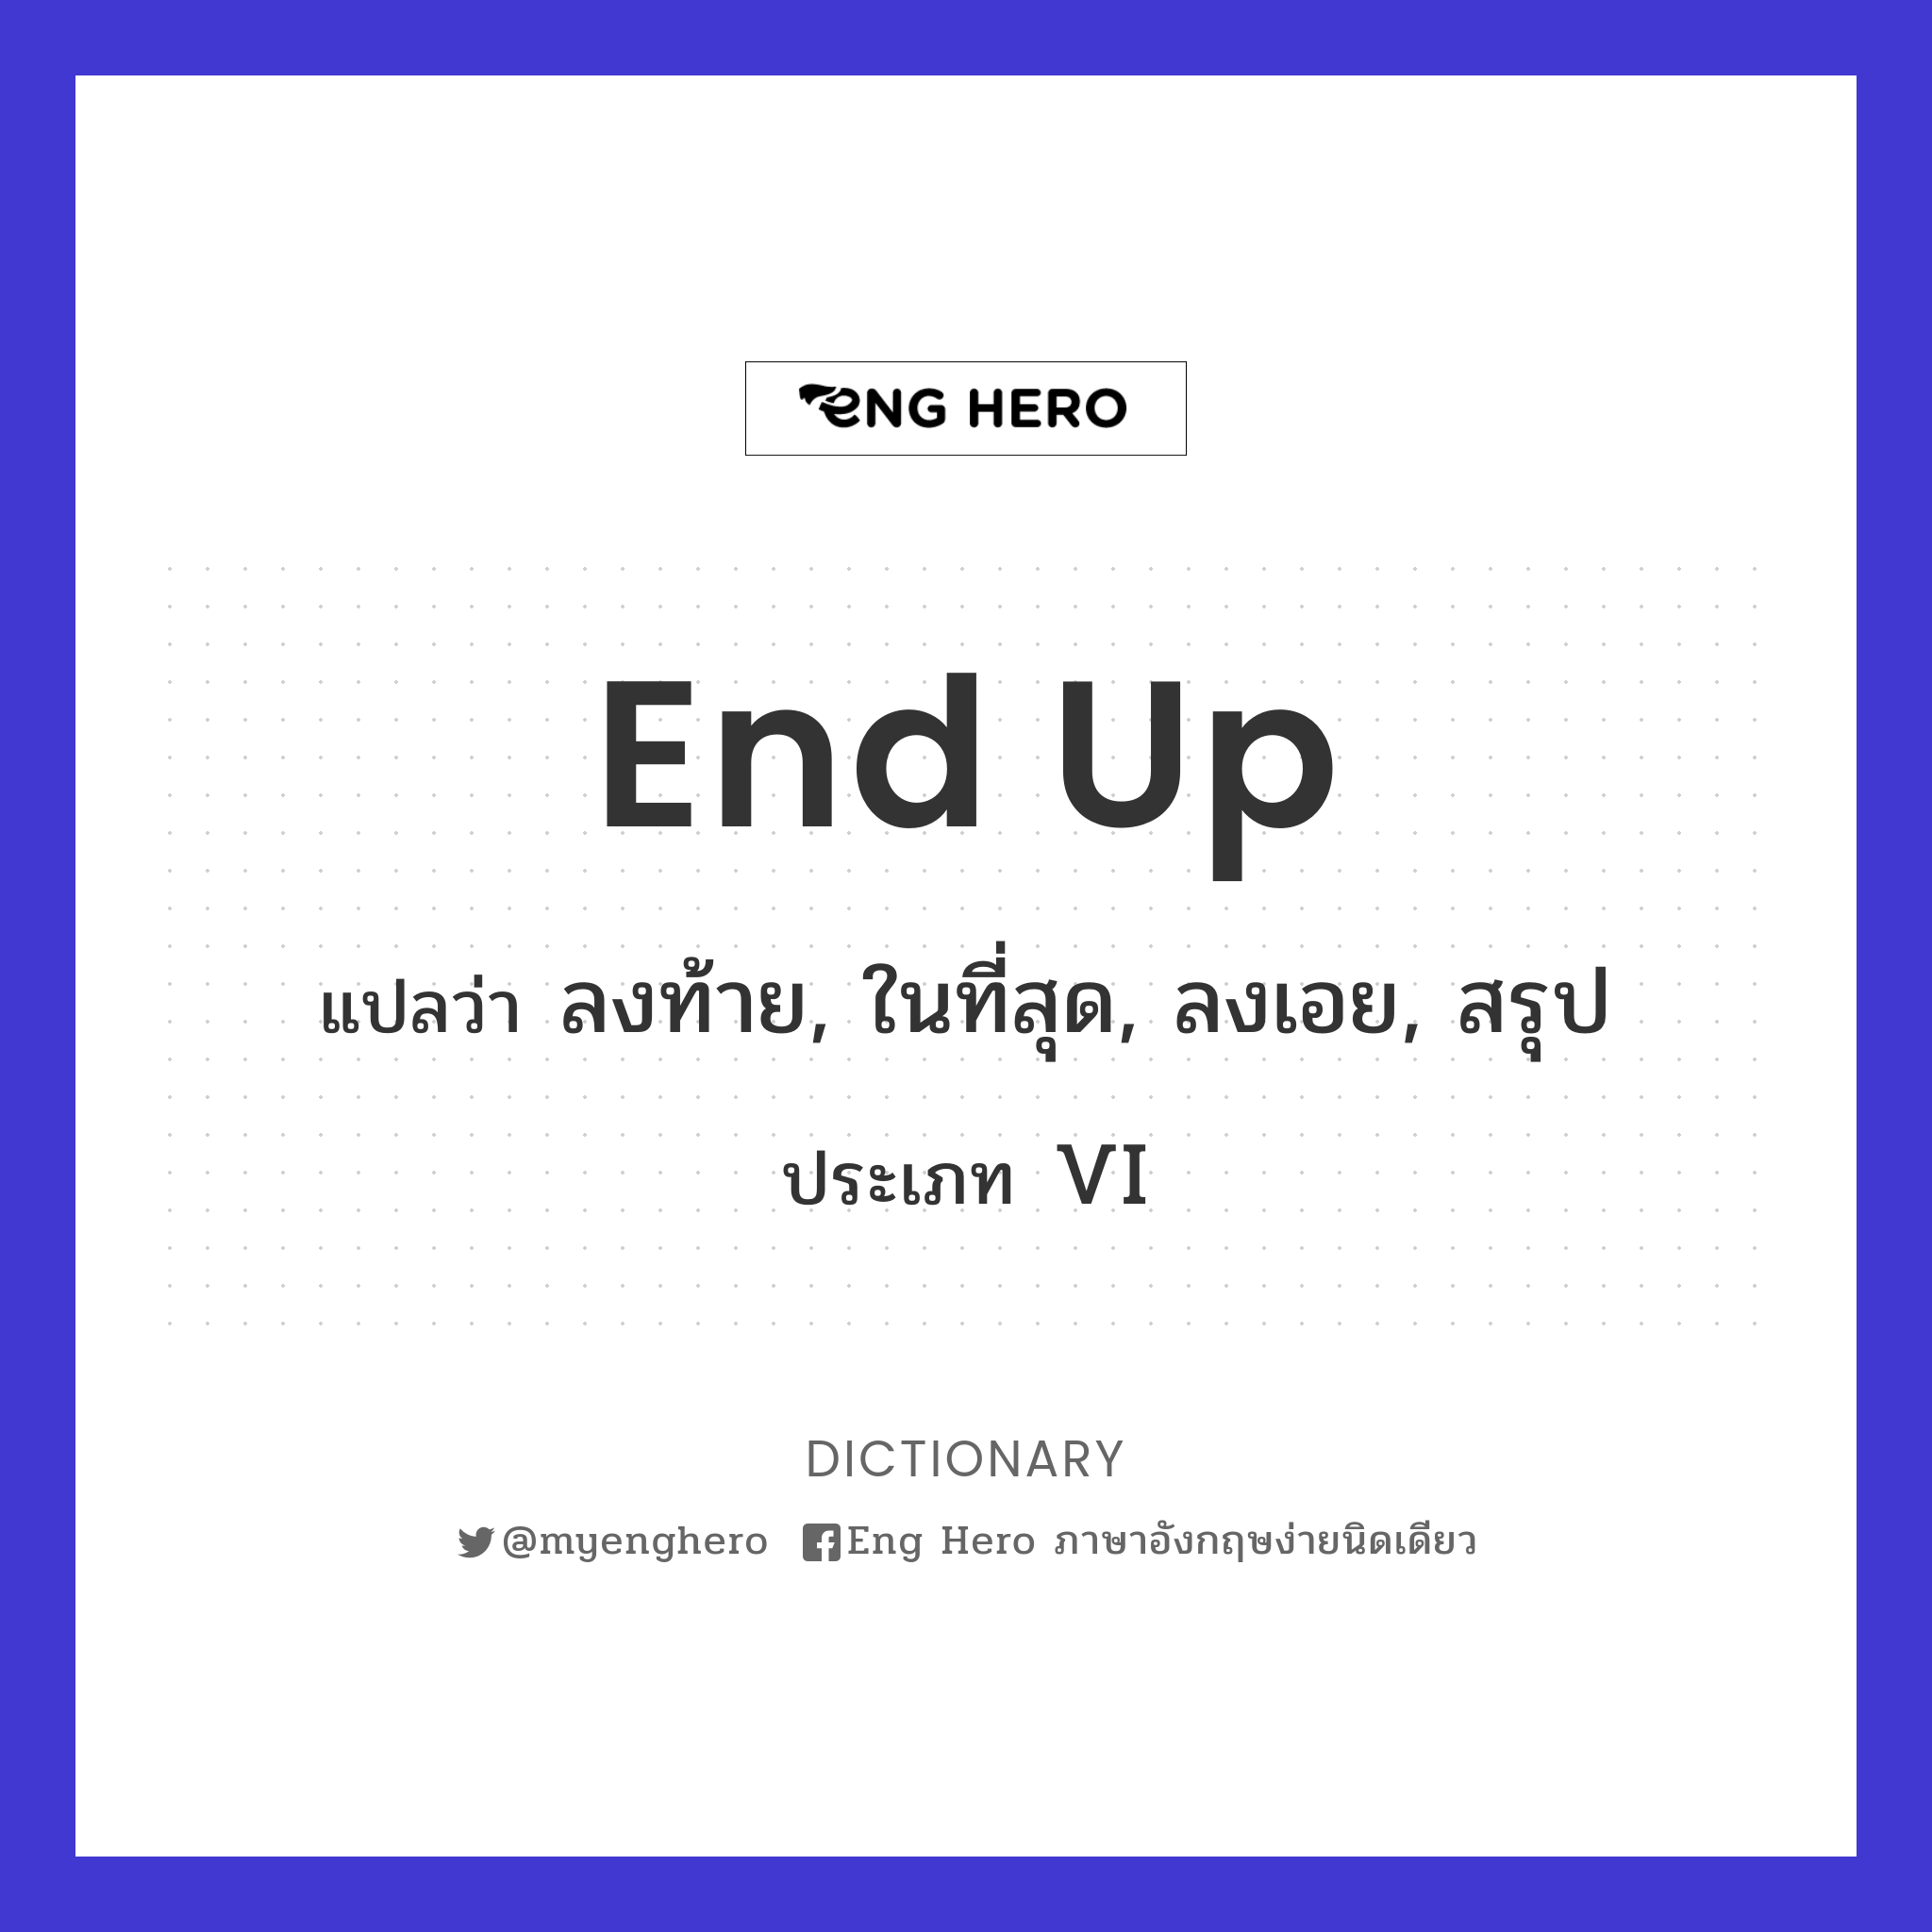 end up